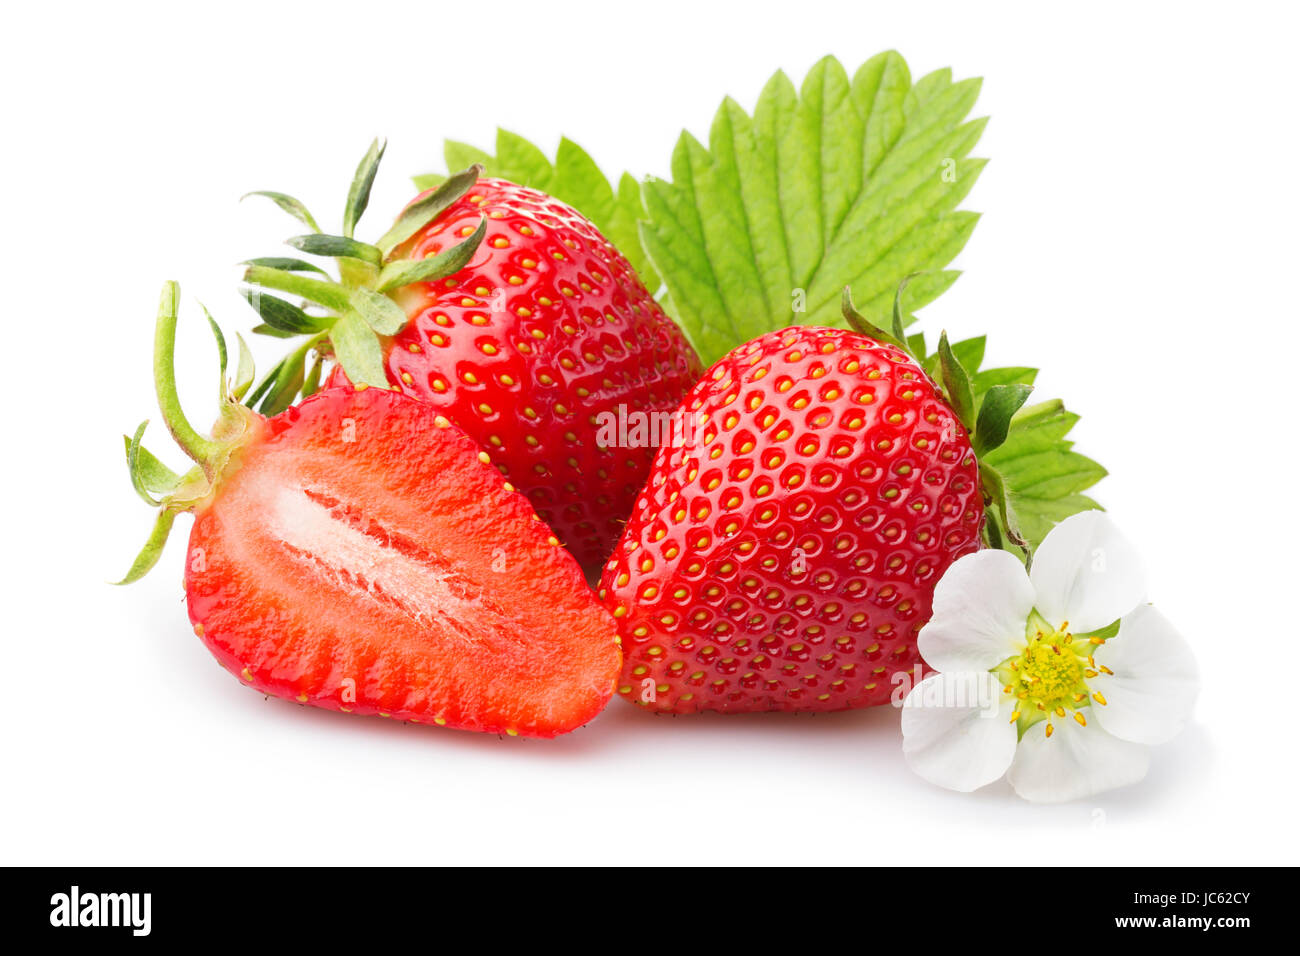 Strawberries with leaves and blossom. Isolated on a white background Stock Photo